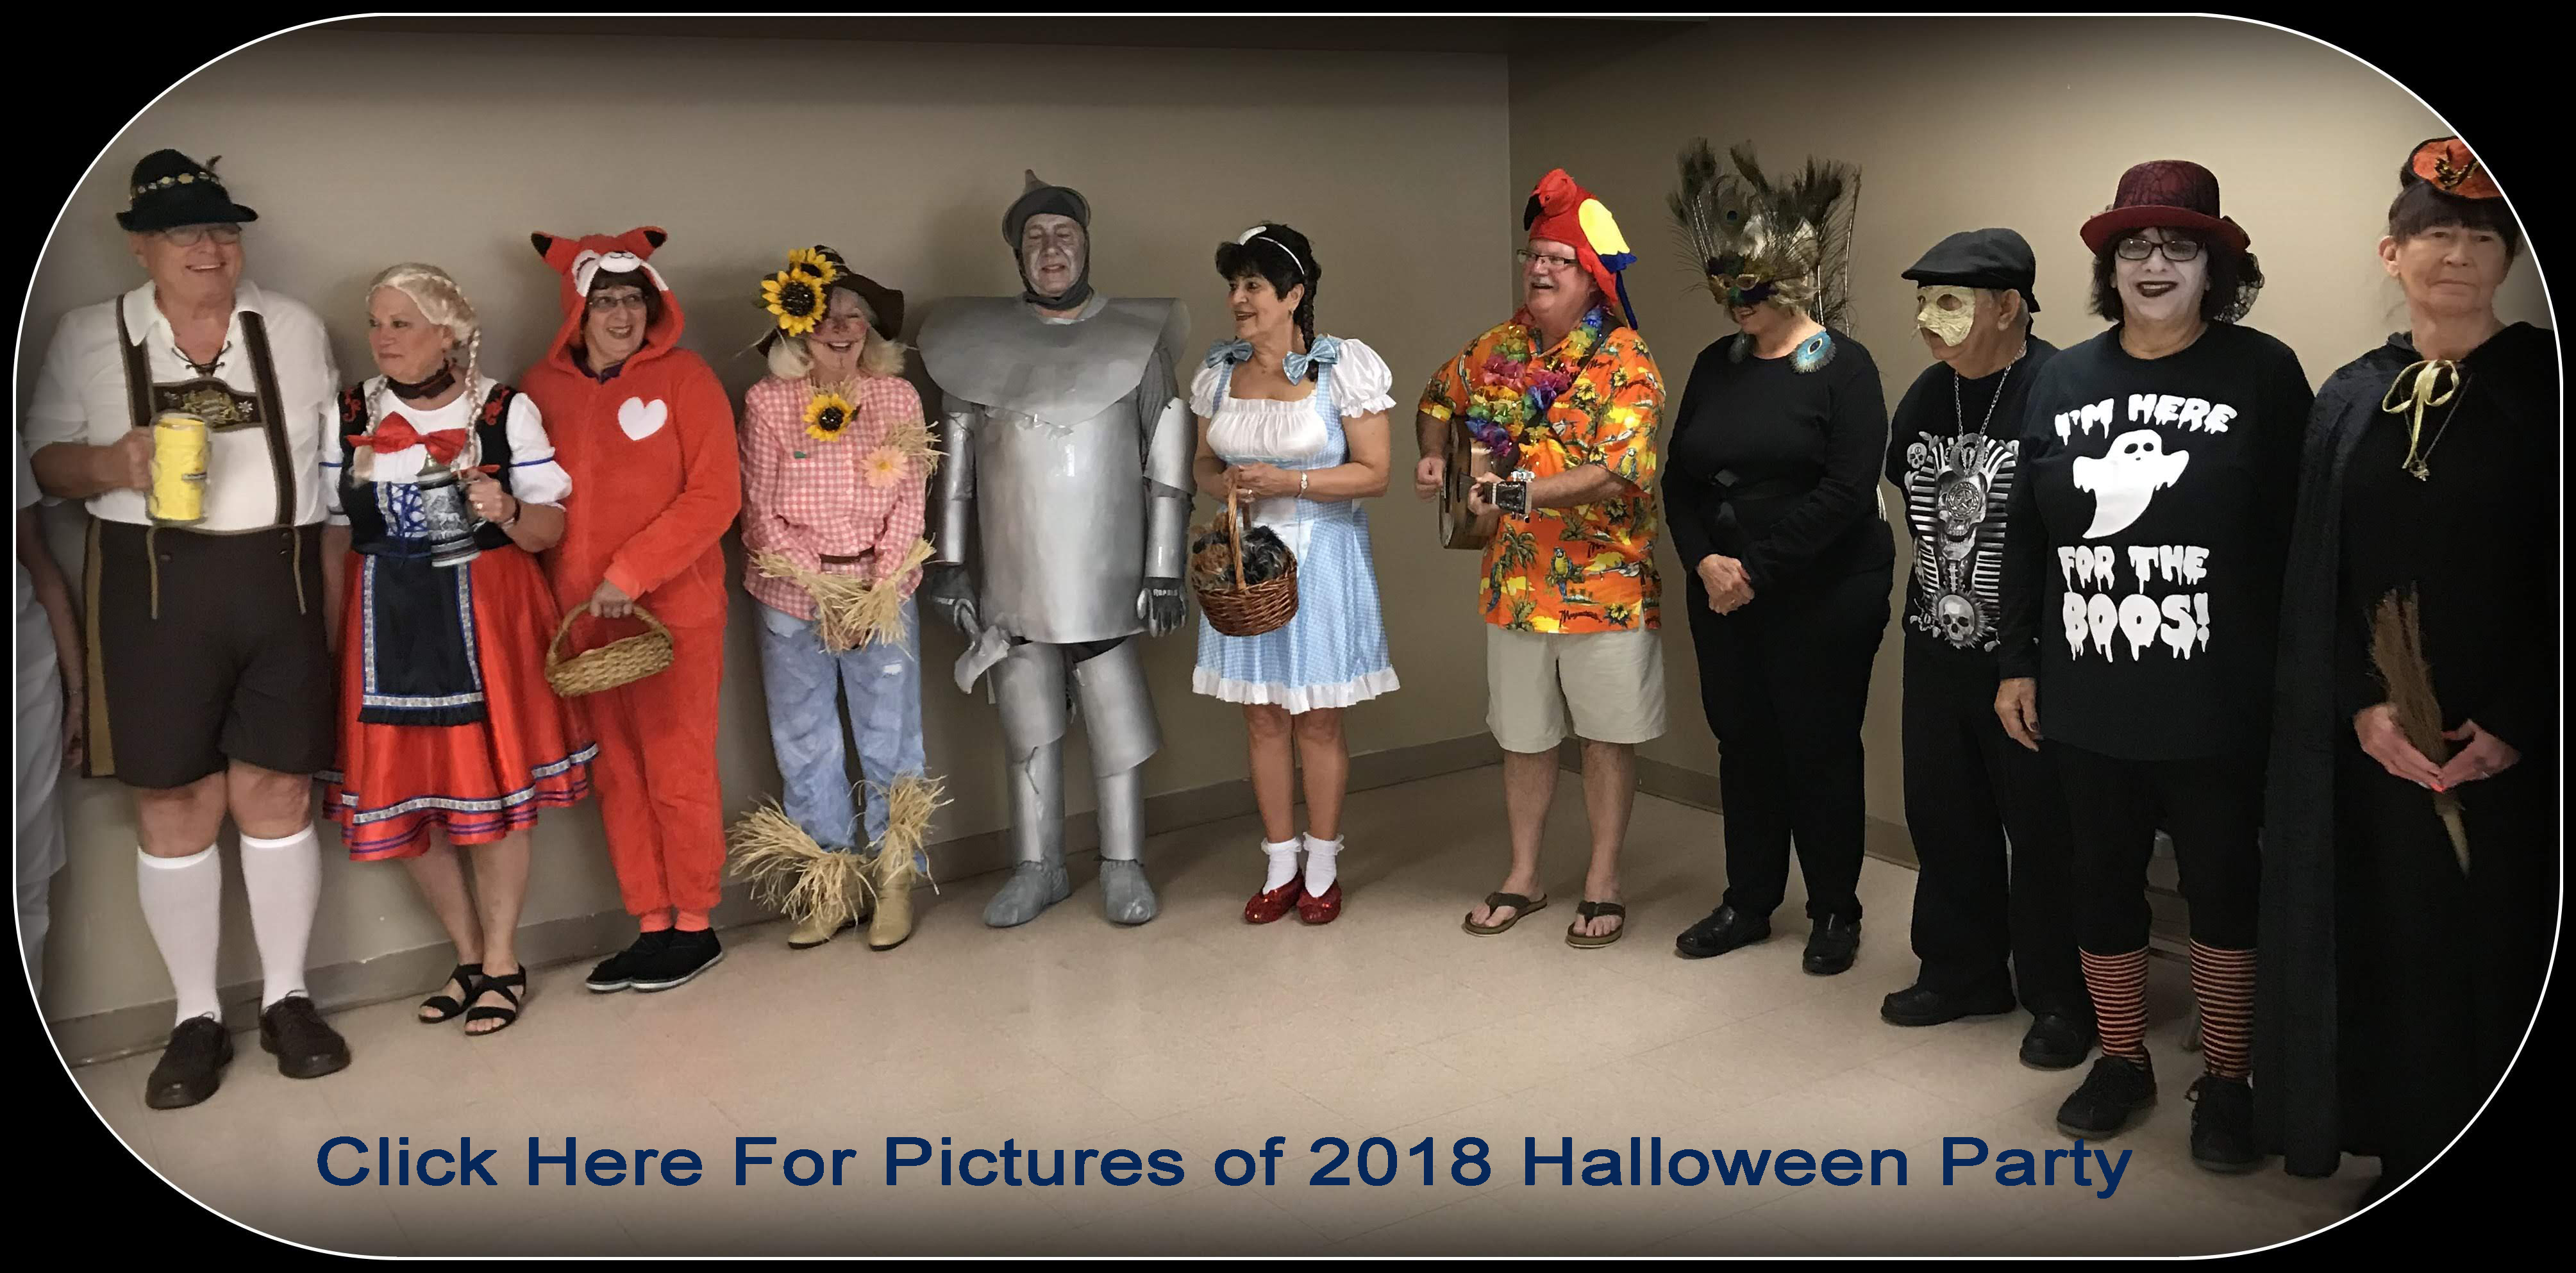 Click for Pictures of 2018 Halloween Party